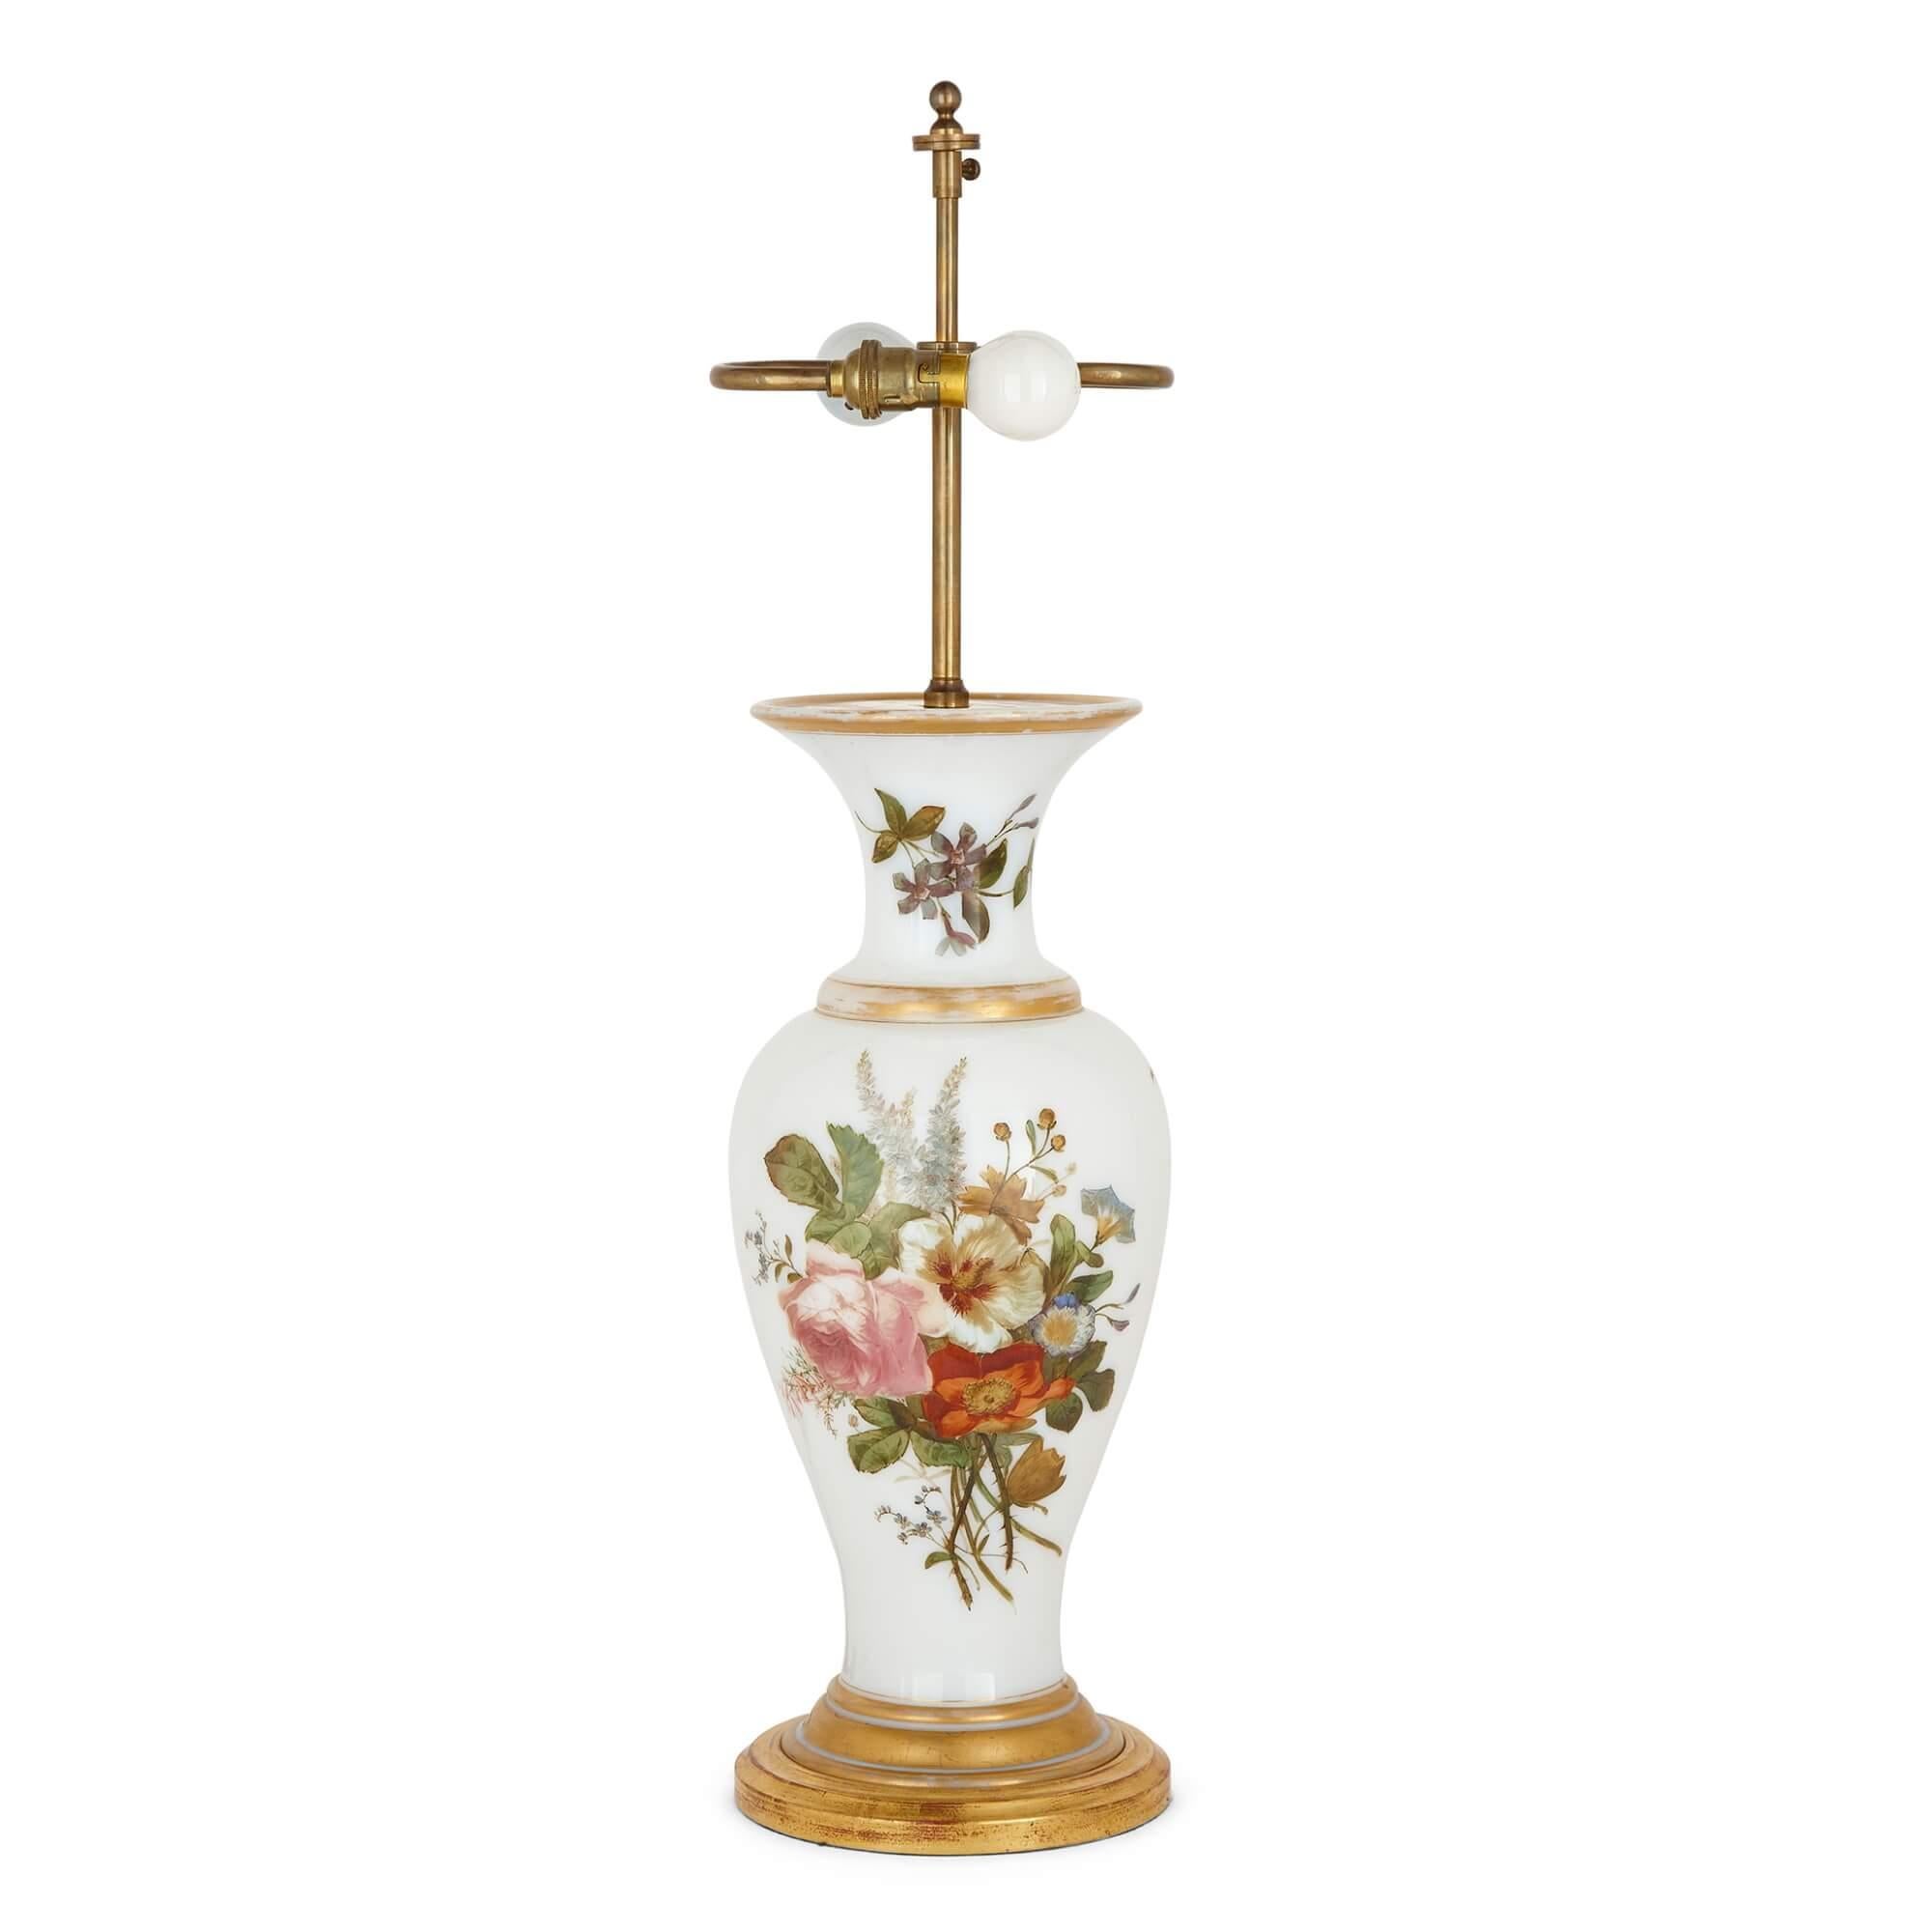 A Baccarat opaline glass lamp, vase formed with floral decoration
French, 19th century
Measures: Lamp: height 74cm, diameter 19cm
Shade: height 27cm, diameter 47cm
Height 44.5cm (excluding lamp fitting)

Originally by Baccarat, this delightful